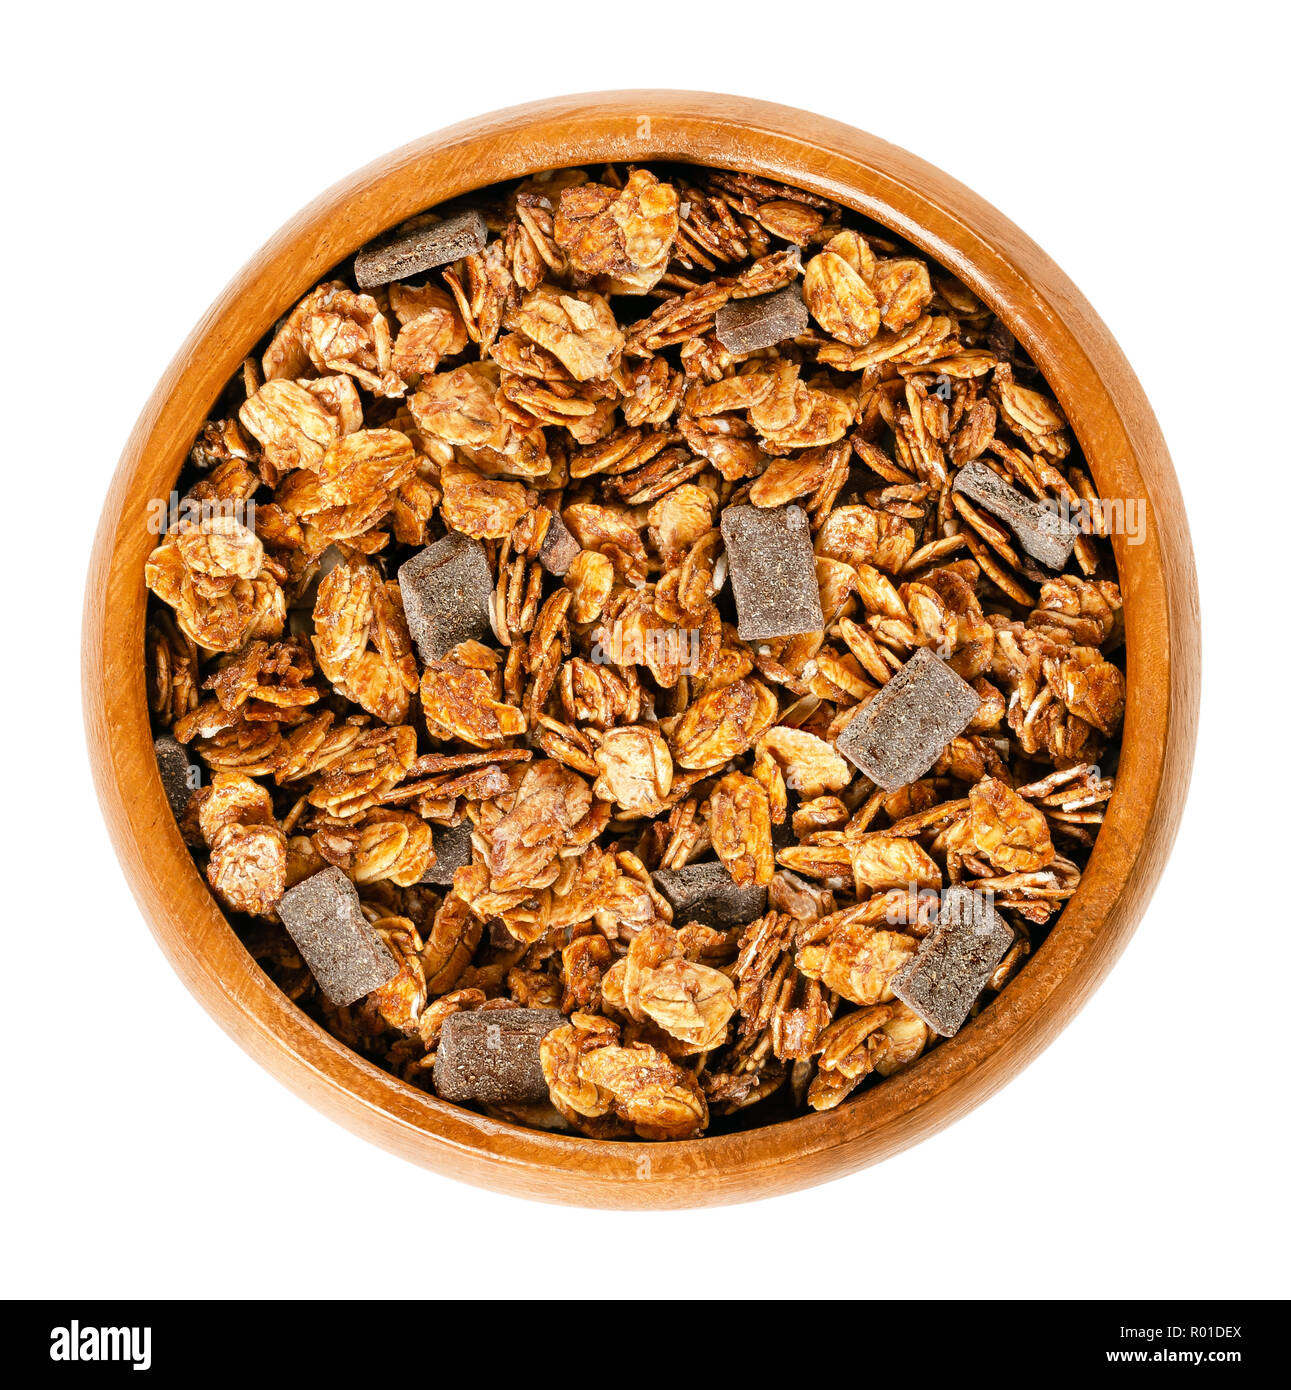 Crunchy chocolate granola in wooden bowl. Crispy cereals, made of rolled and toasted whole grain oat flakes, date juice and dark chocolate chunks. Stock Photo